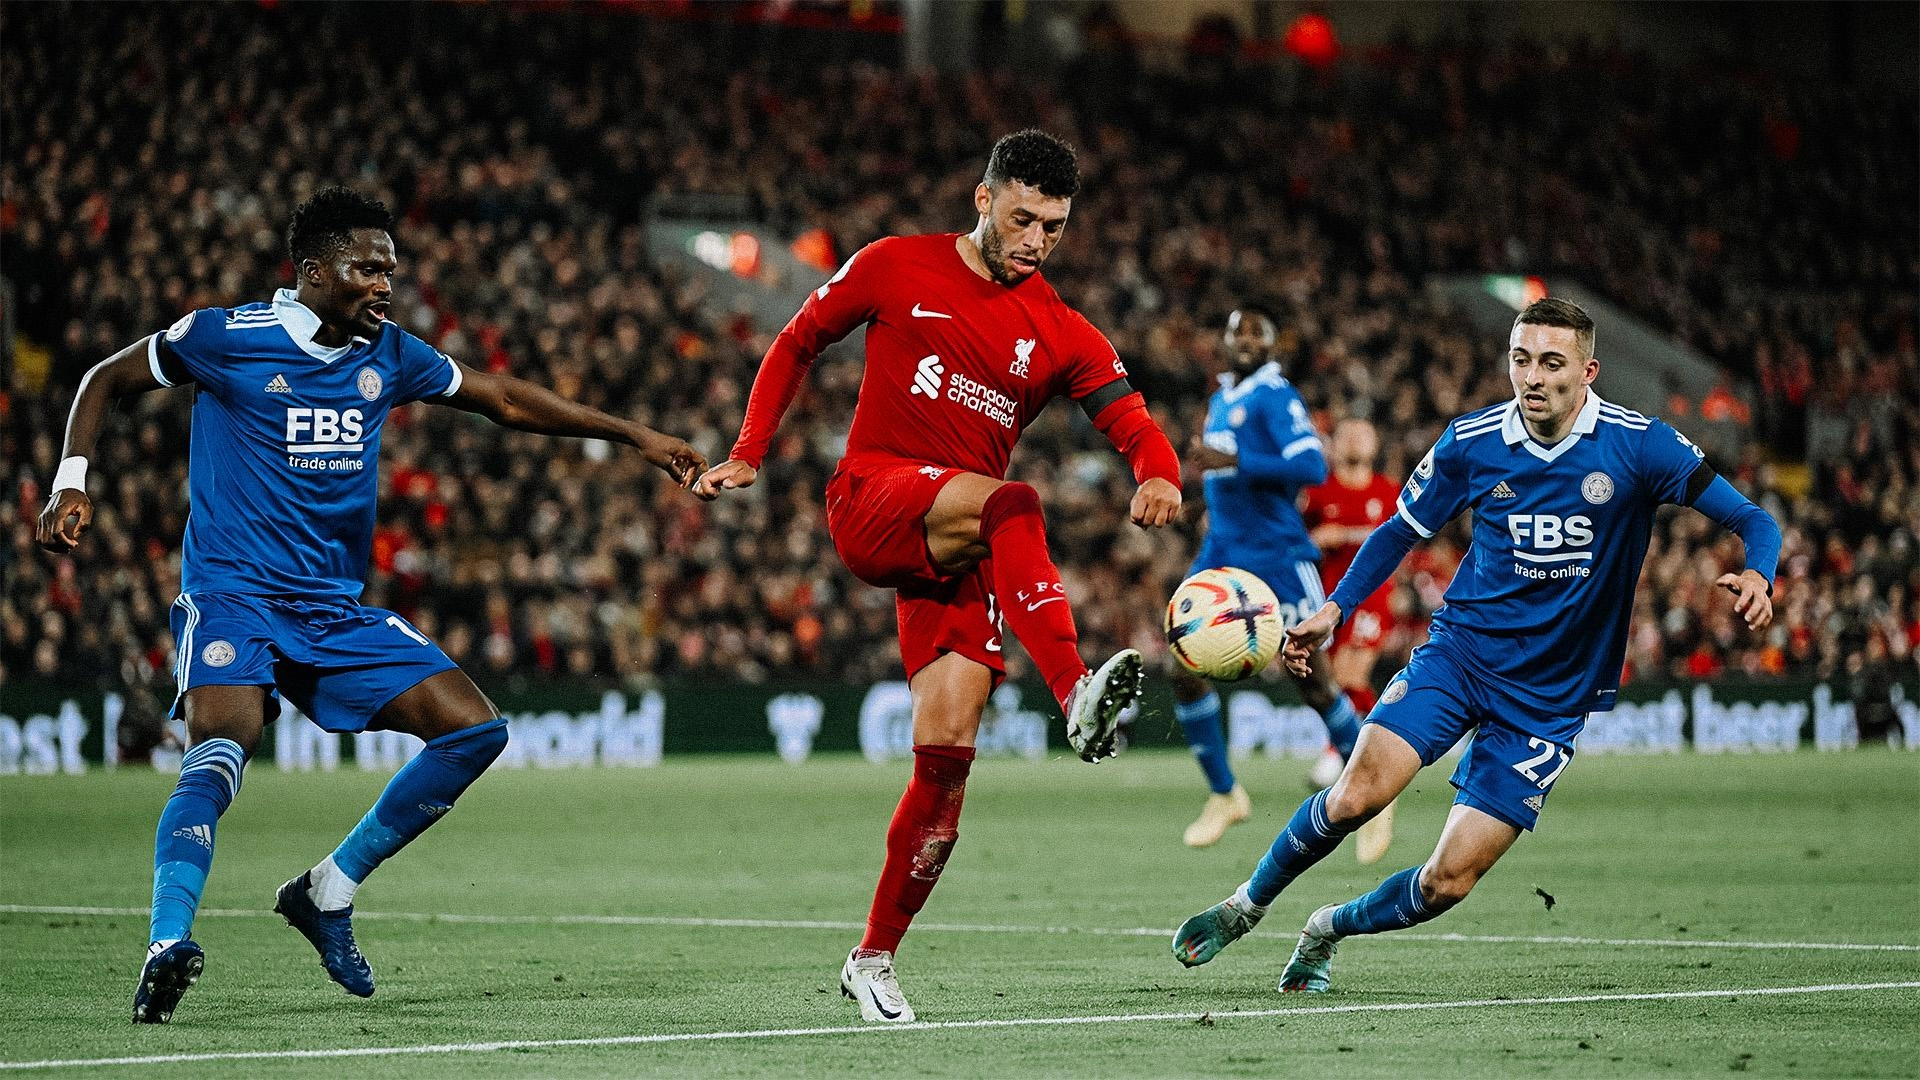 Liverpool FC — Liverpool return to Anfield with victory over Leicester